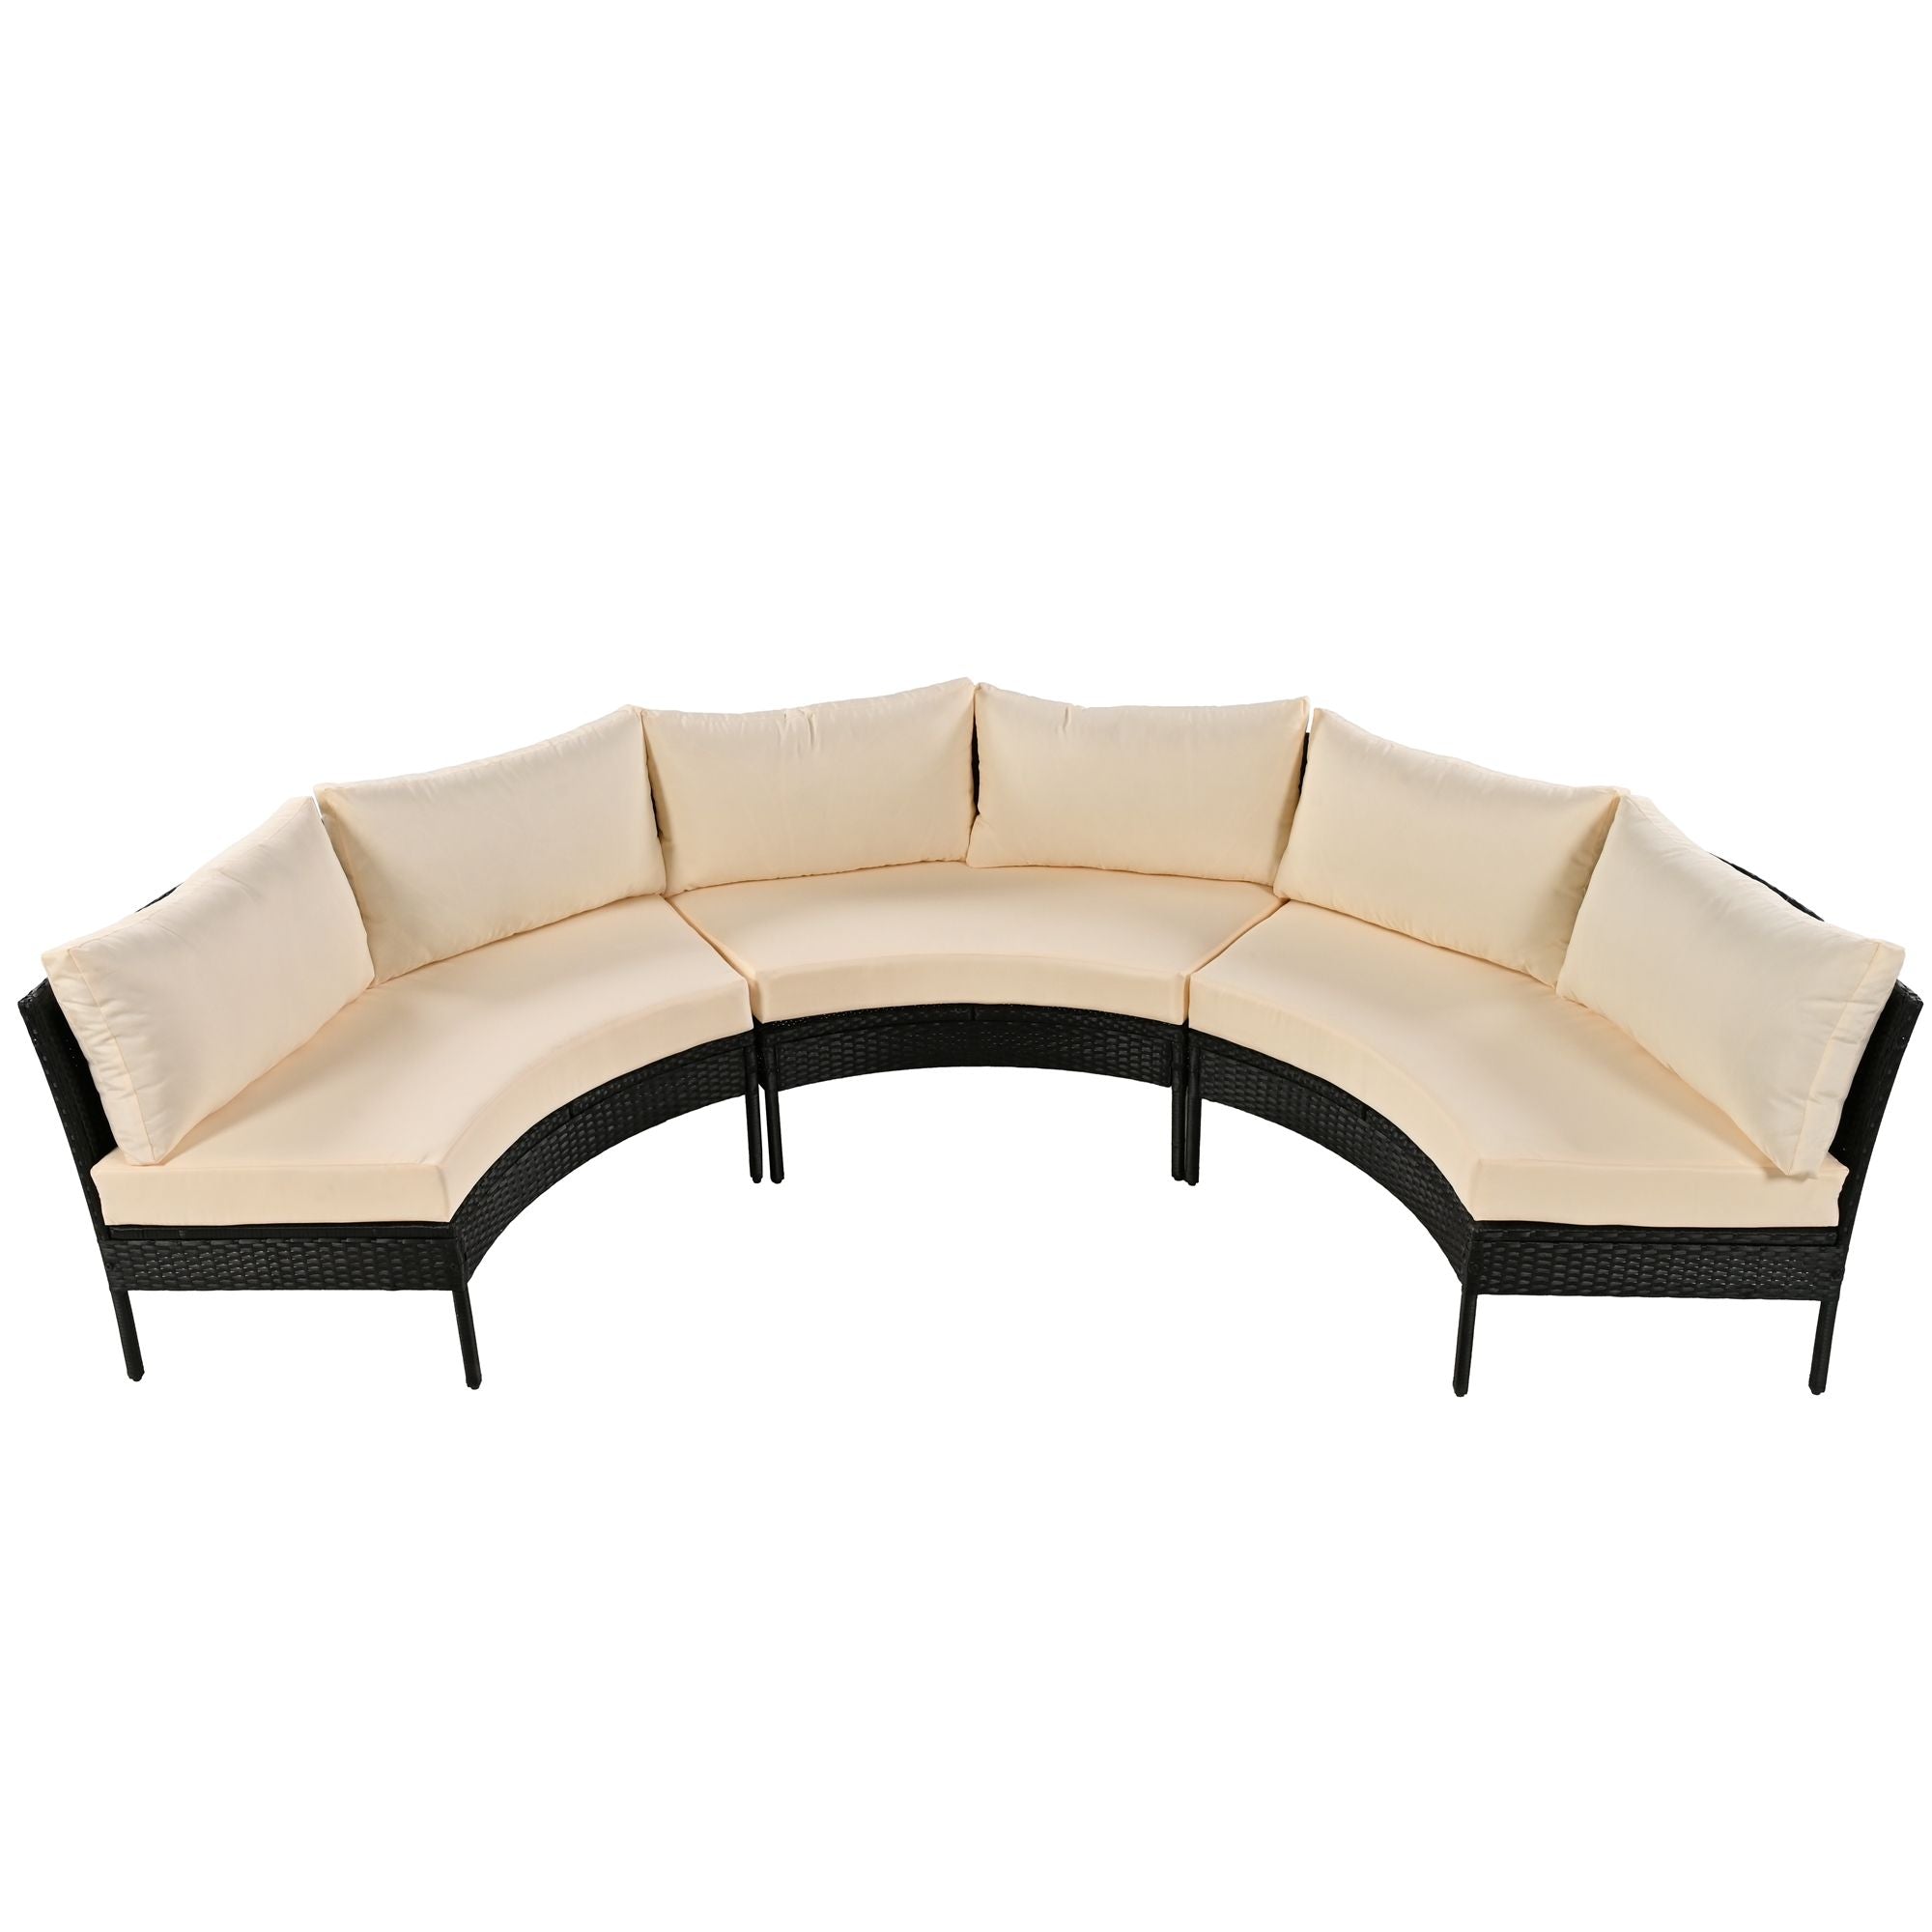 U_Style Patio Furniture Set, 3 Piece Curved Outdoor Conversation Set, All Weather Sectional Sofa With Cushions - Beige